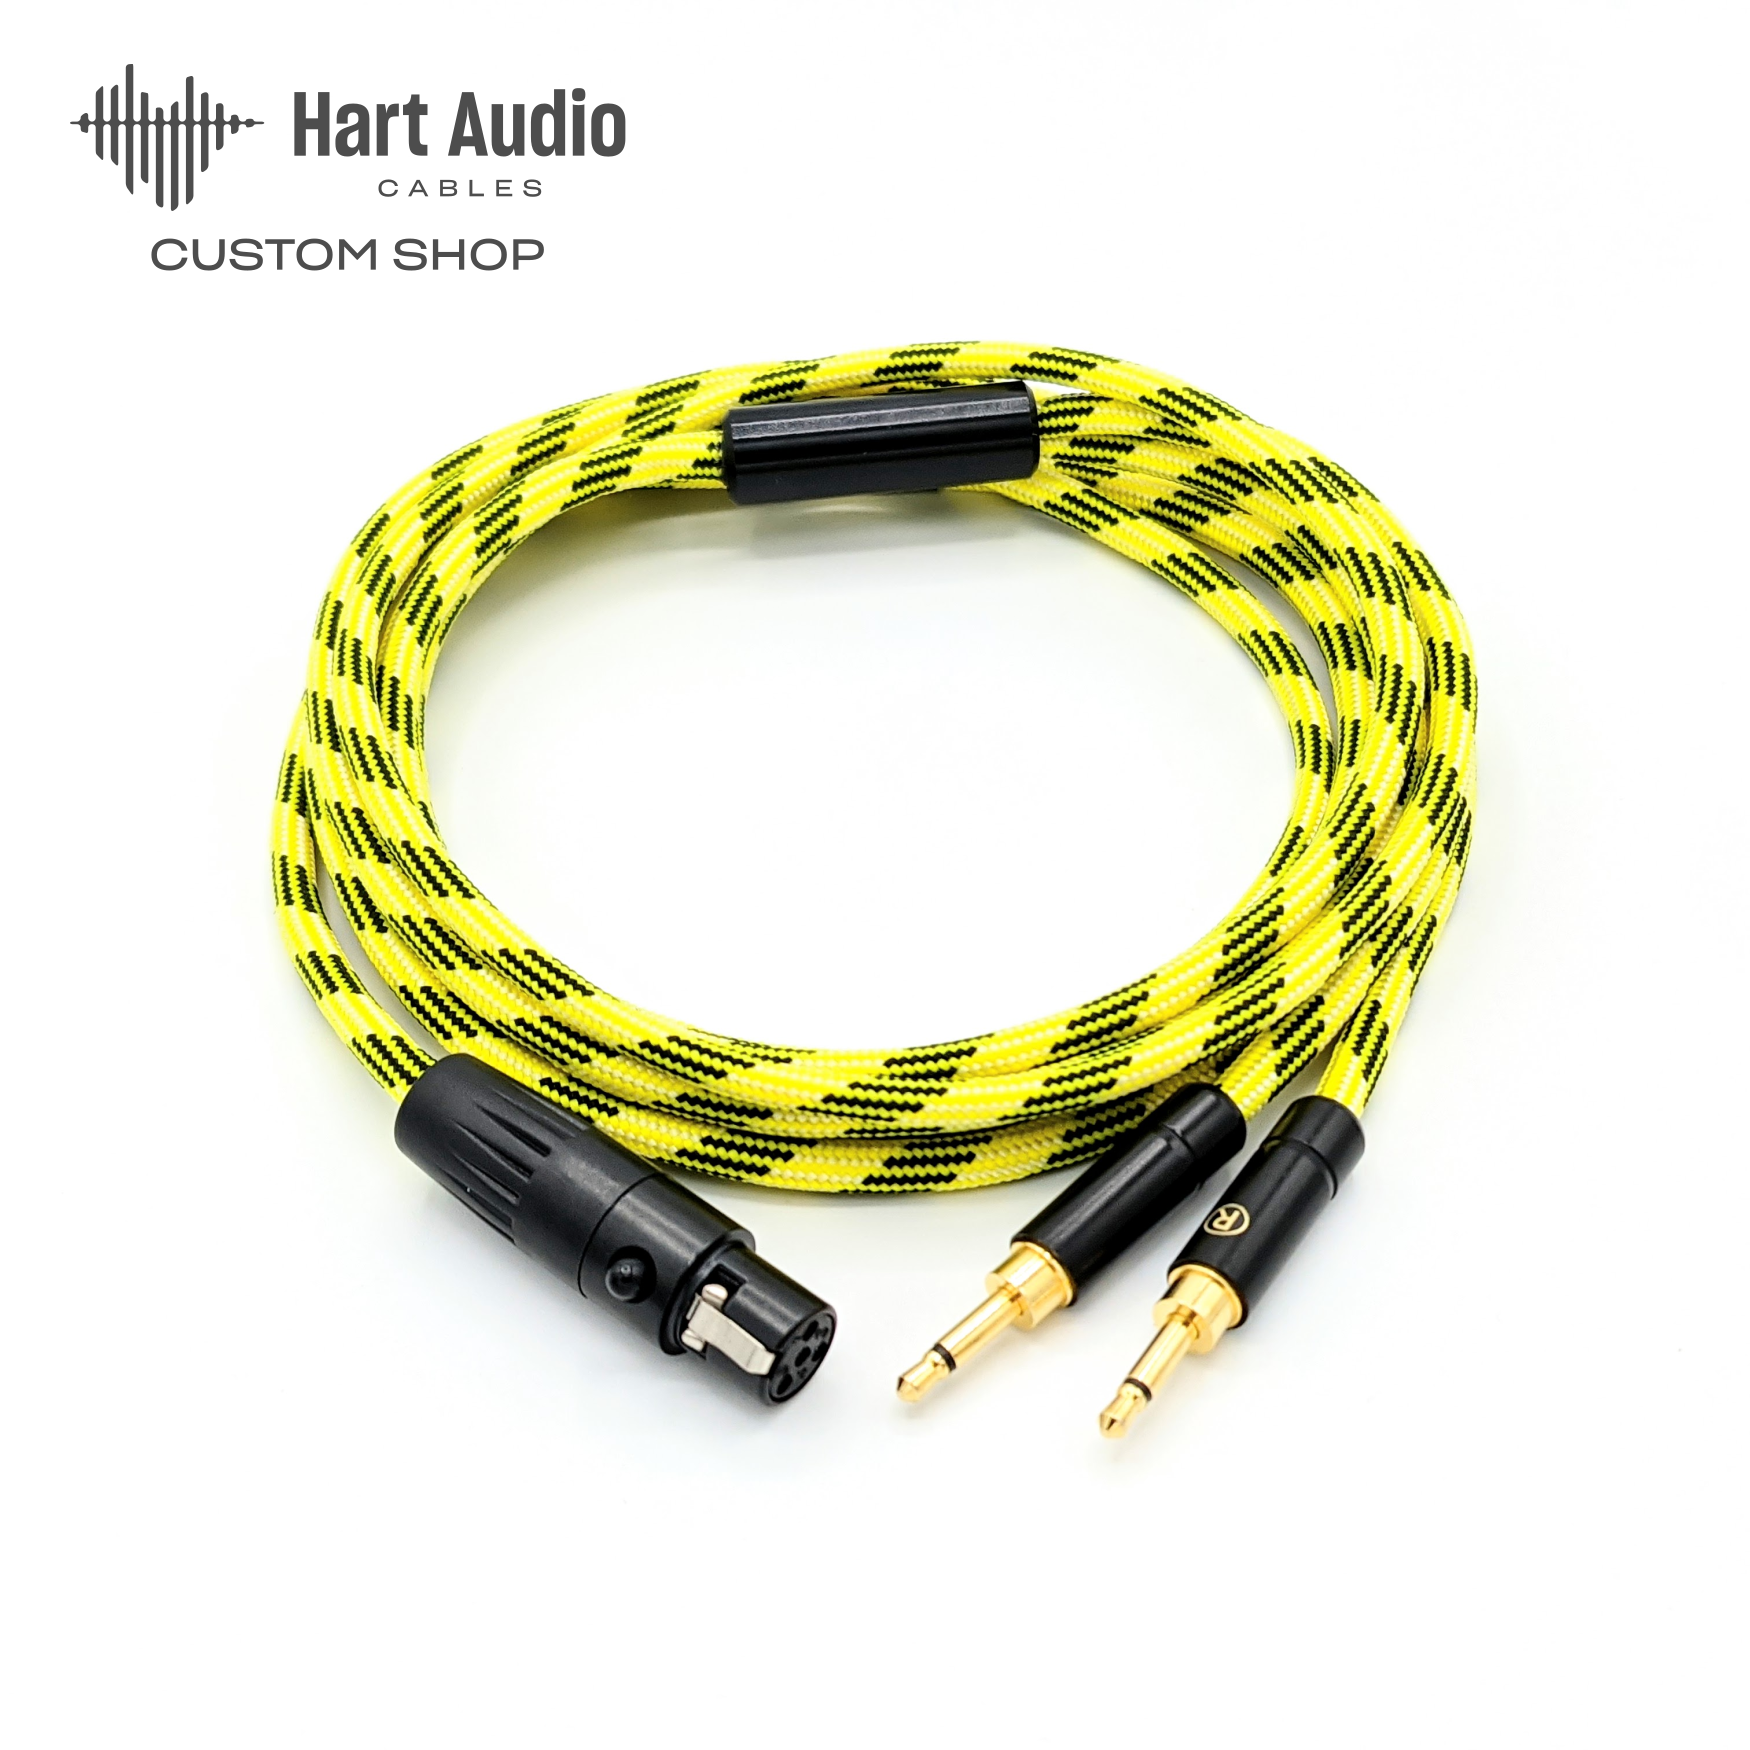 Dual 3.5mm Cable for Sony, Beyerdynamic headphones and more